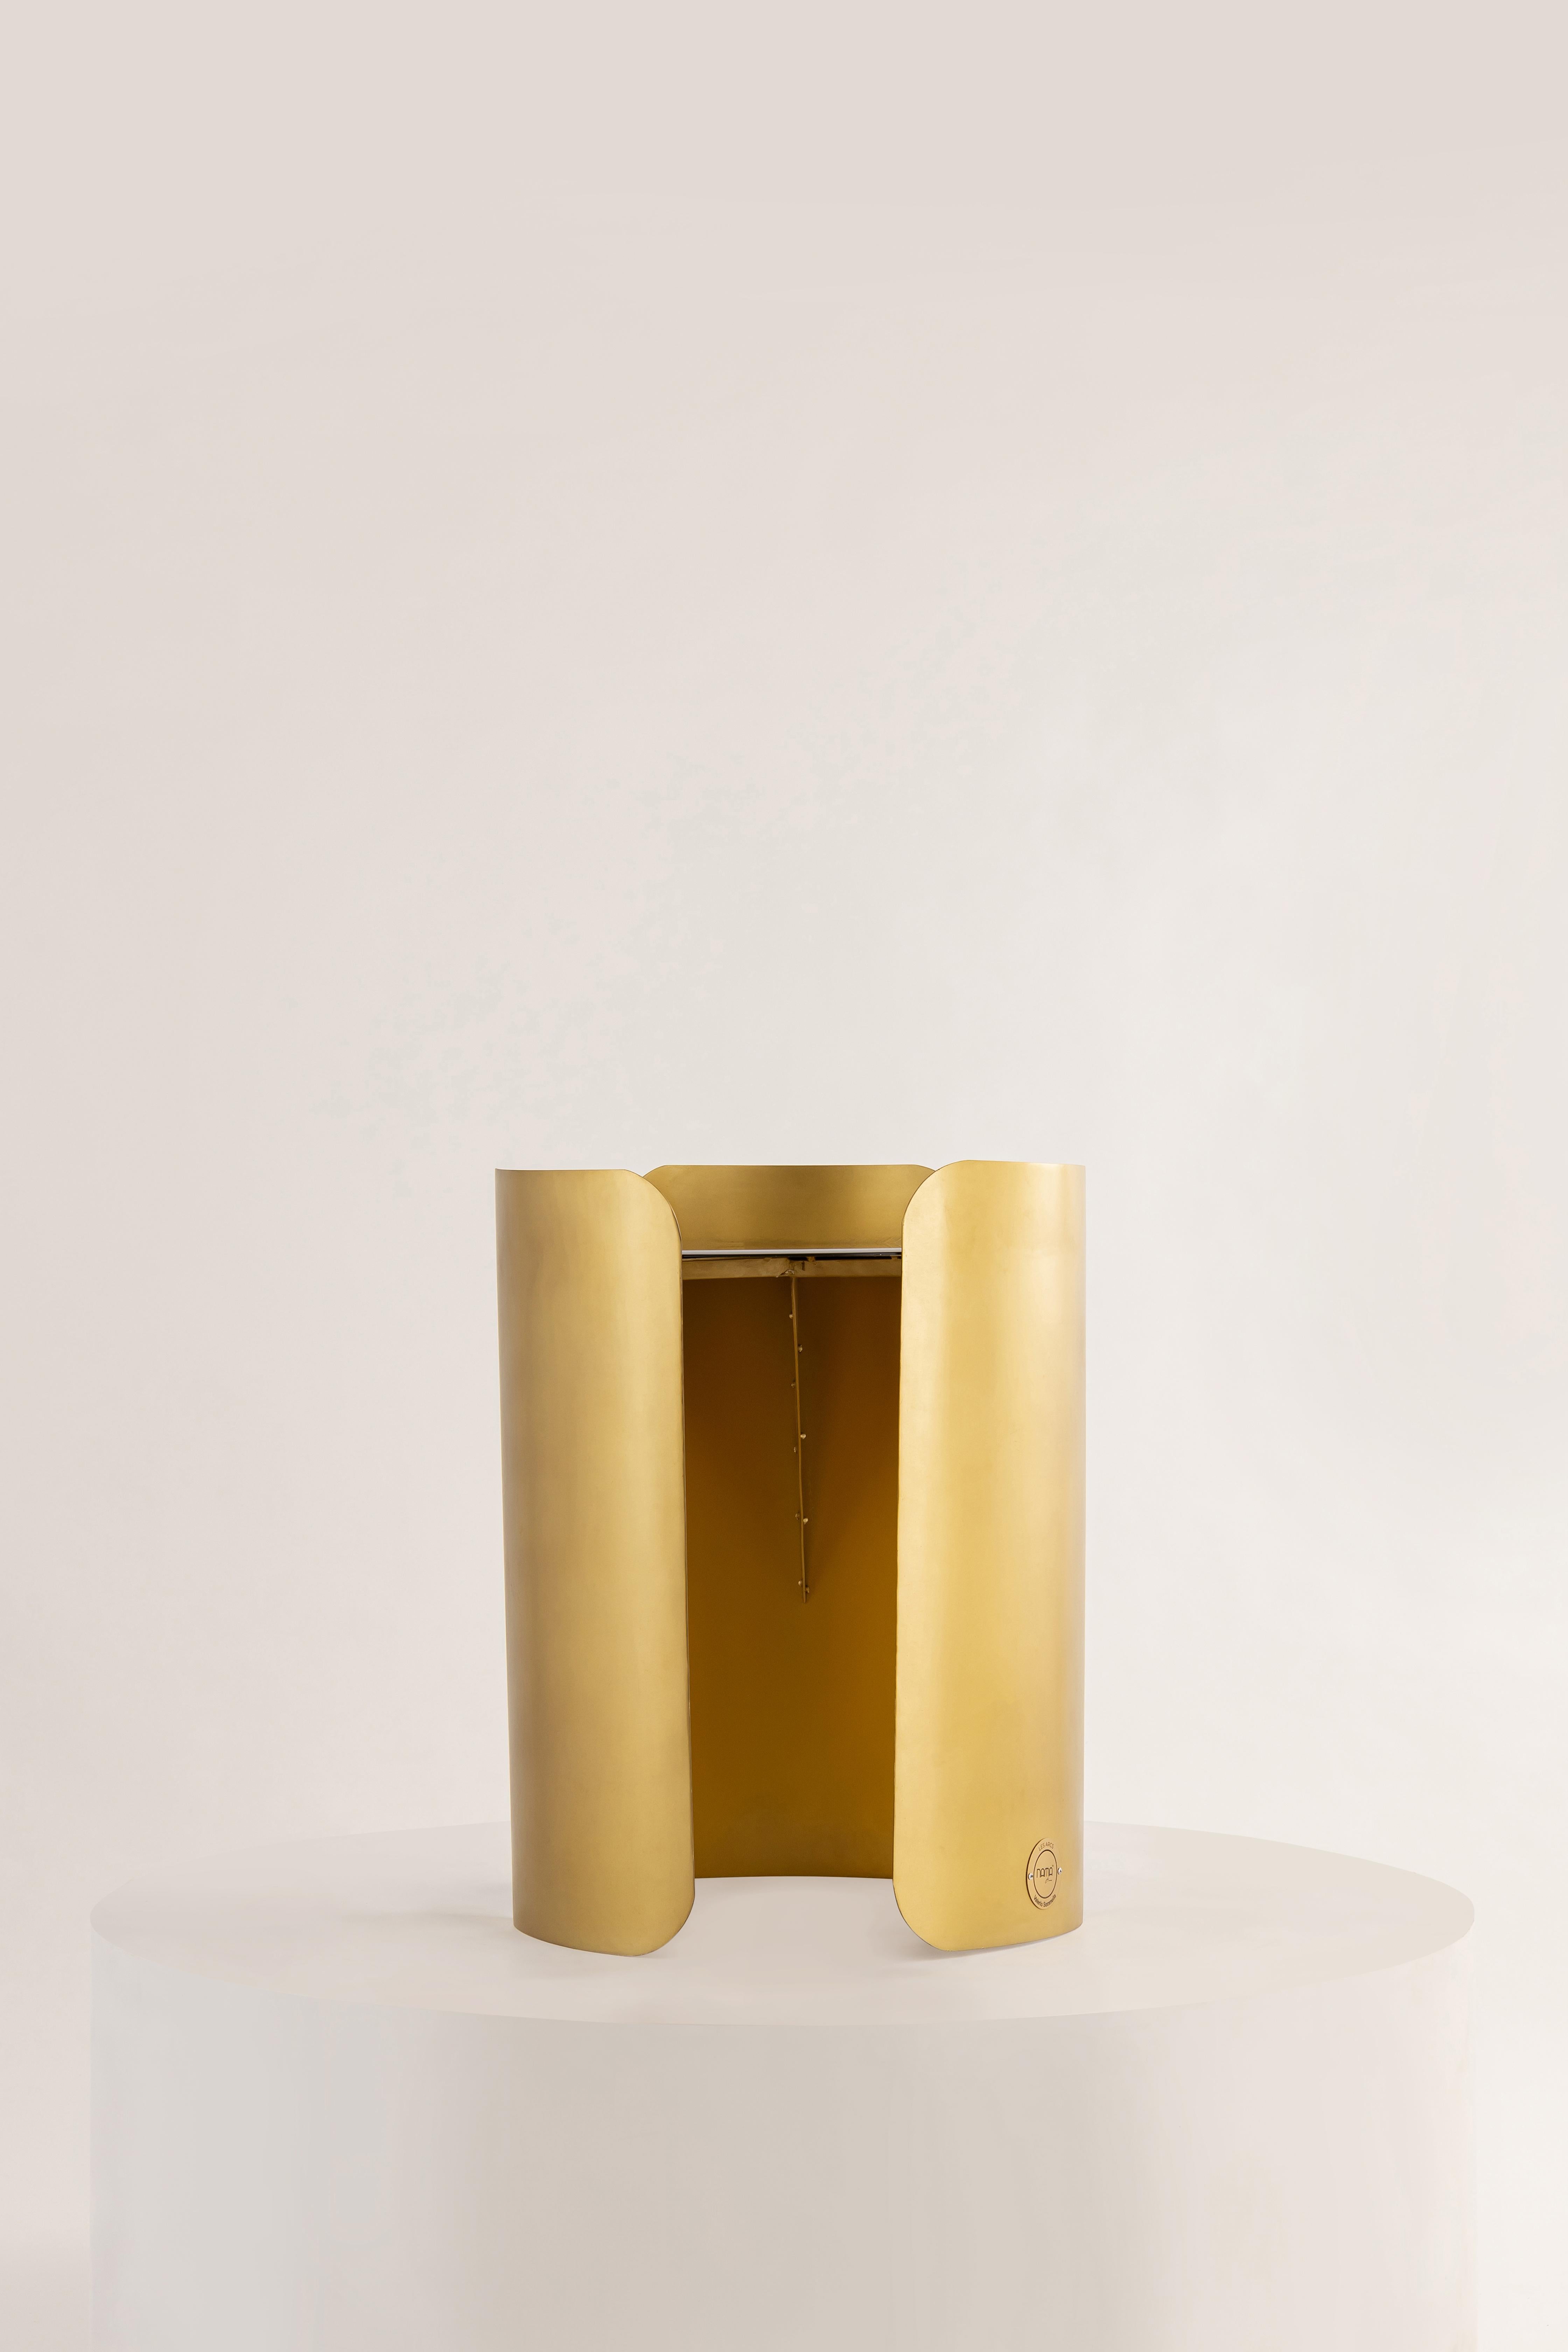 Etched Hug Side Table  by  Valerio Sommella For Sale